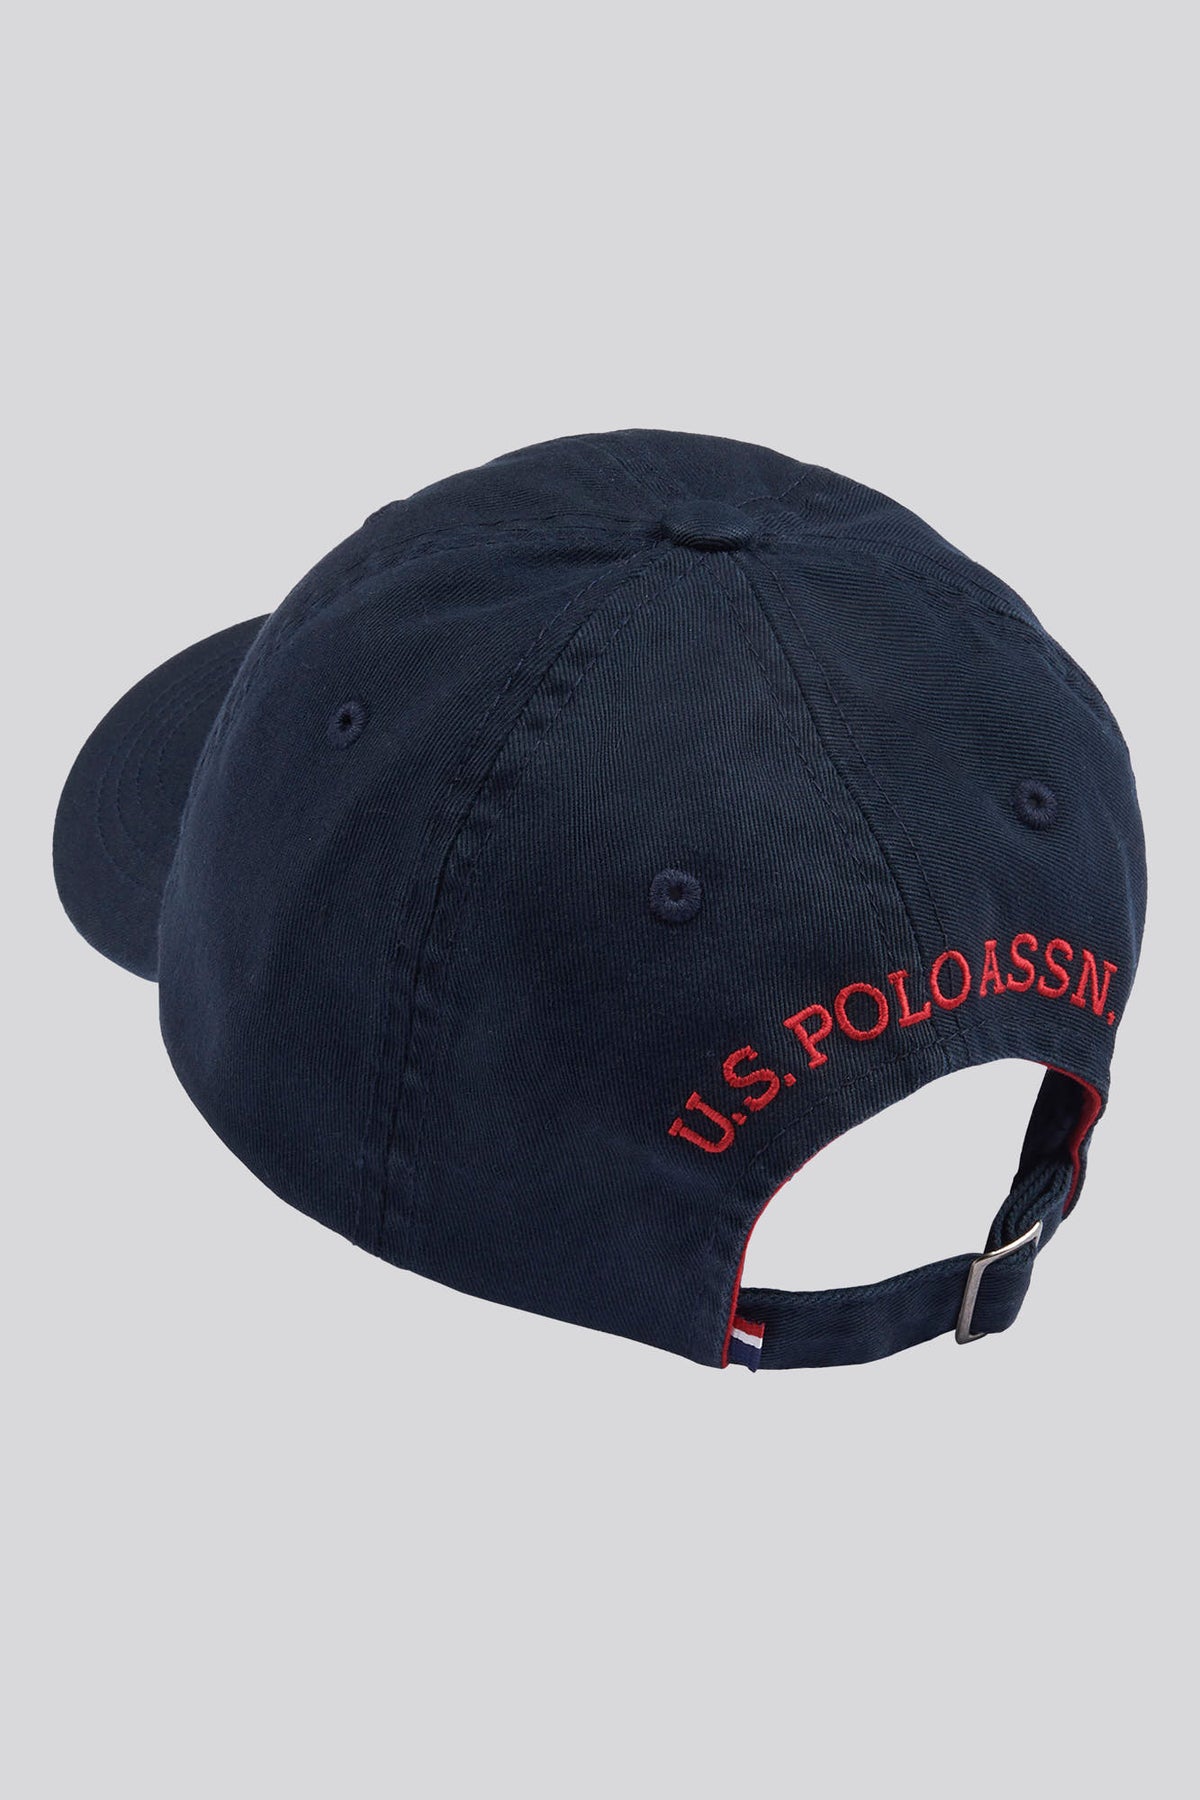 Boys Washed Canvas Cap in Dark Sapphire Navy / Haute Red DHM